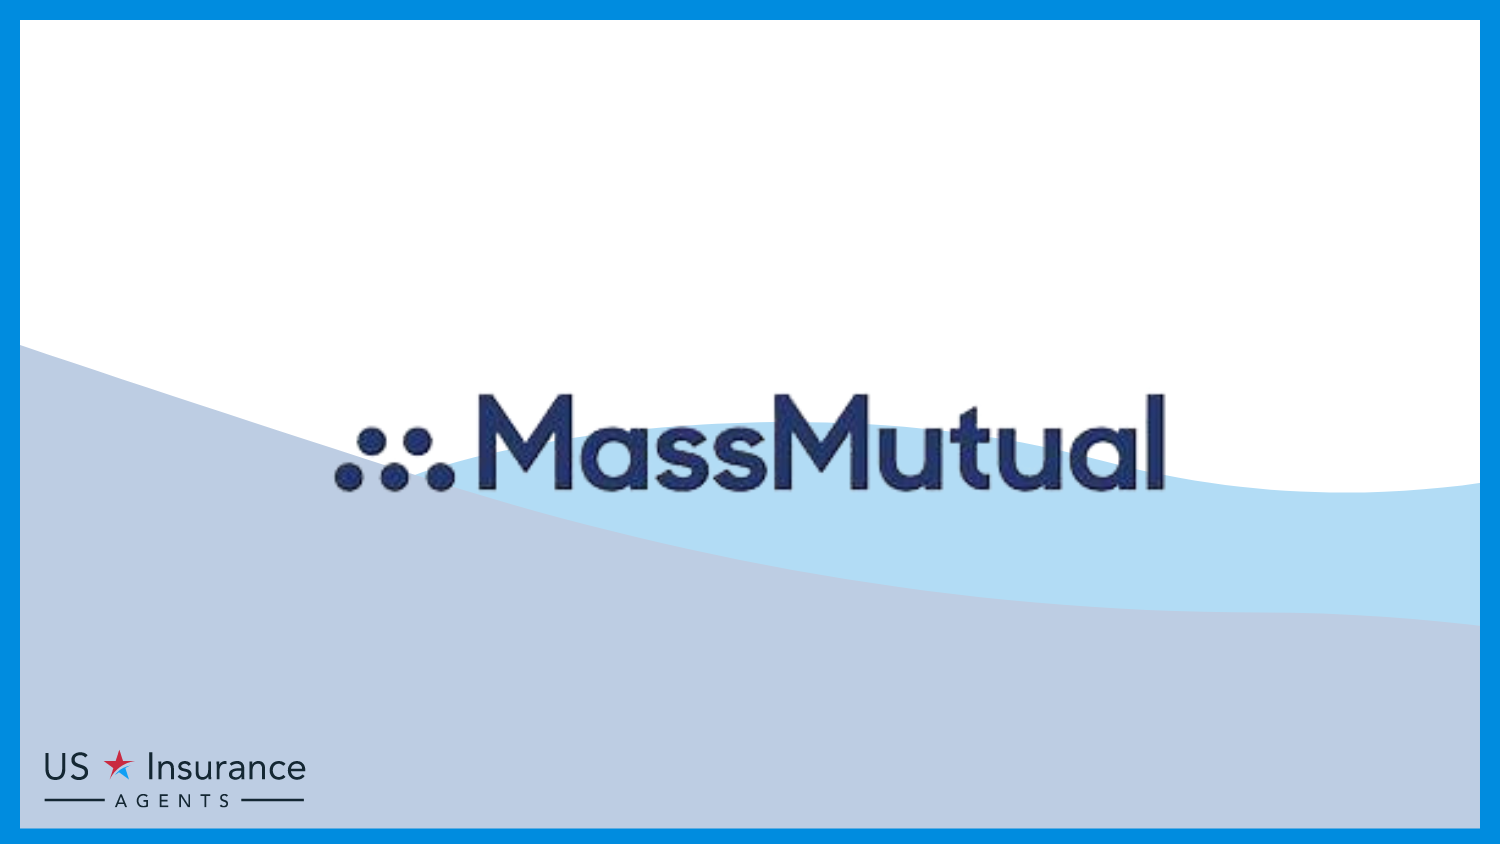 MassMutual: Best Life Insurance for Kidney Transplant Patients